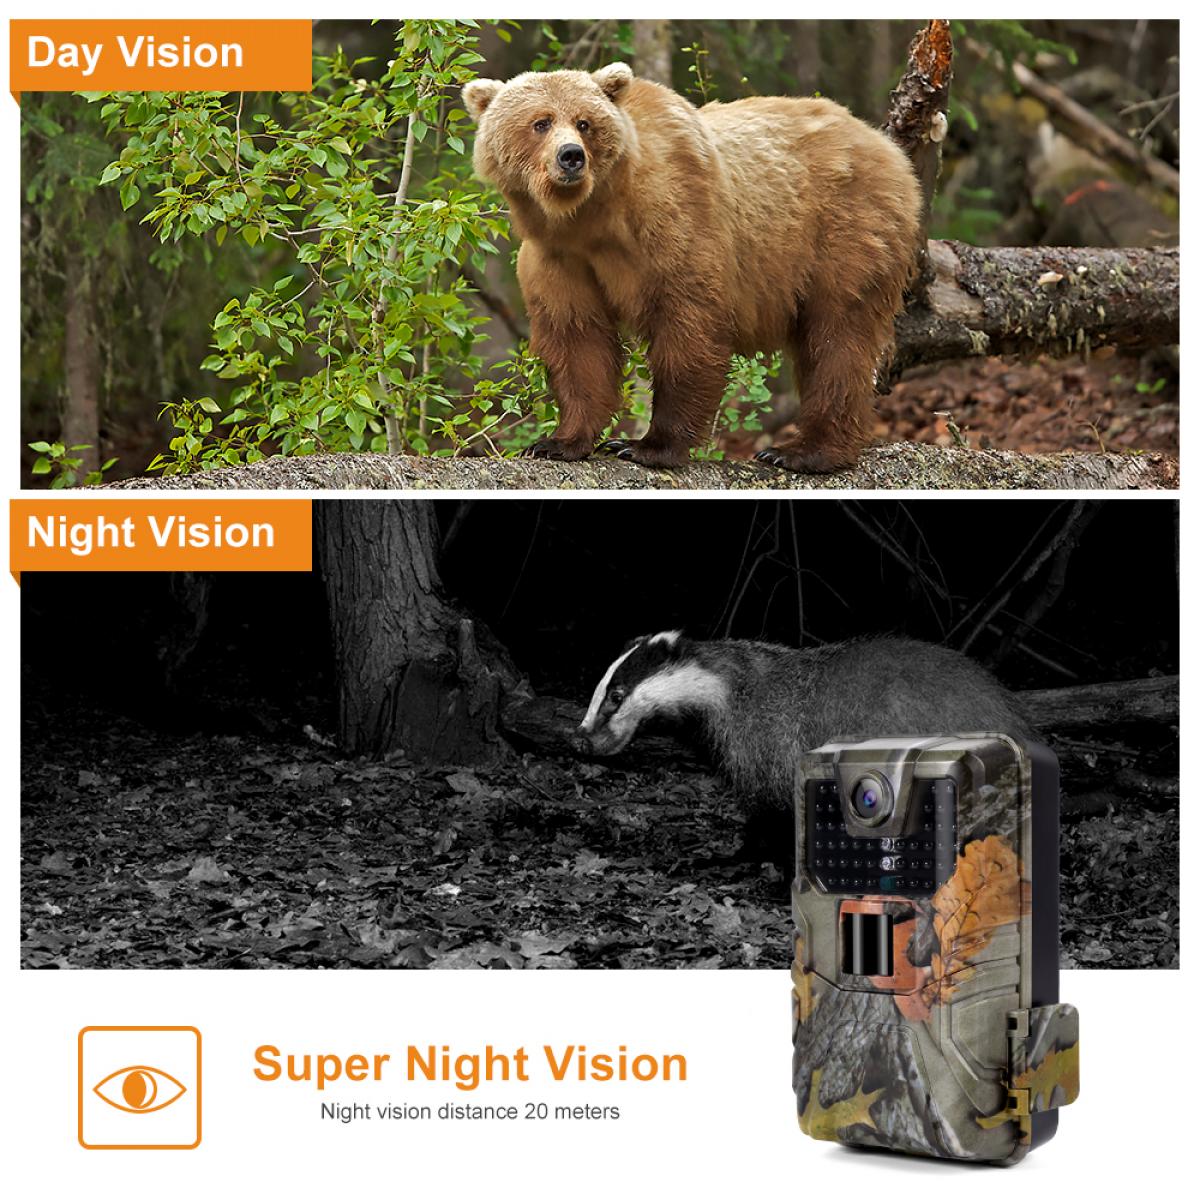 K&F HC-900A 20MP/0.3 seconds Trigger/1 PIR HD Outdoor trail camera Waterproof Hunting Infrared Night Vision Camera